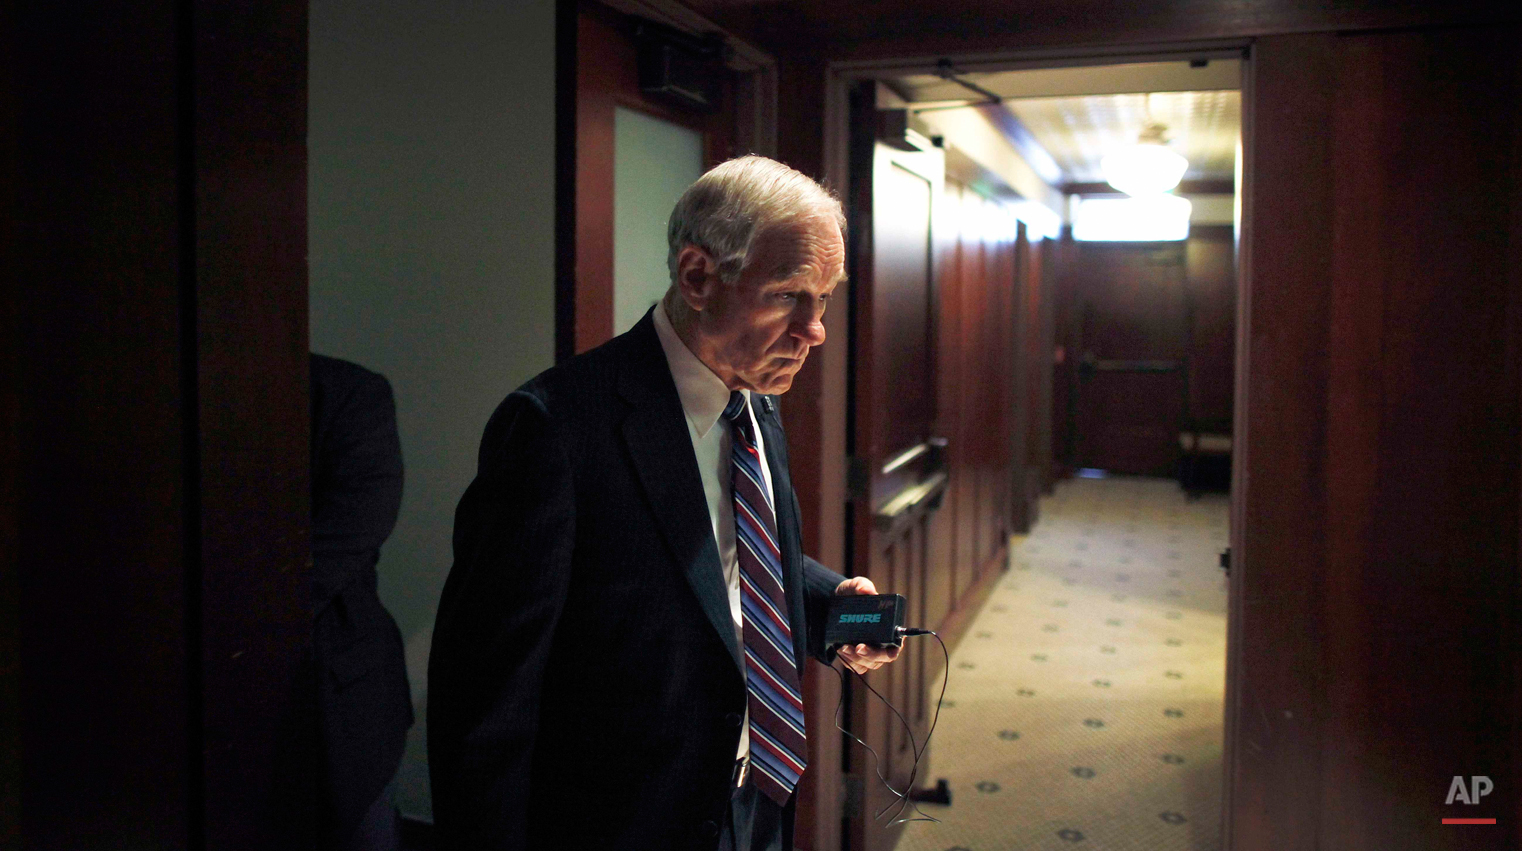  Republican presidential candidate, Rep. Ron Paul, R-Texas walks in a hallway before speaking at a campaign event, Thursday, Dec. 29, 2011, at the Hotel Pattee in Perry, Iowa. (AP Photo/Charles Dharapak) 